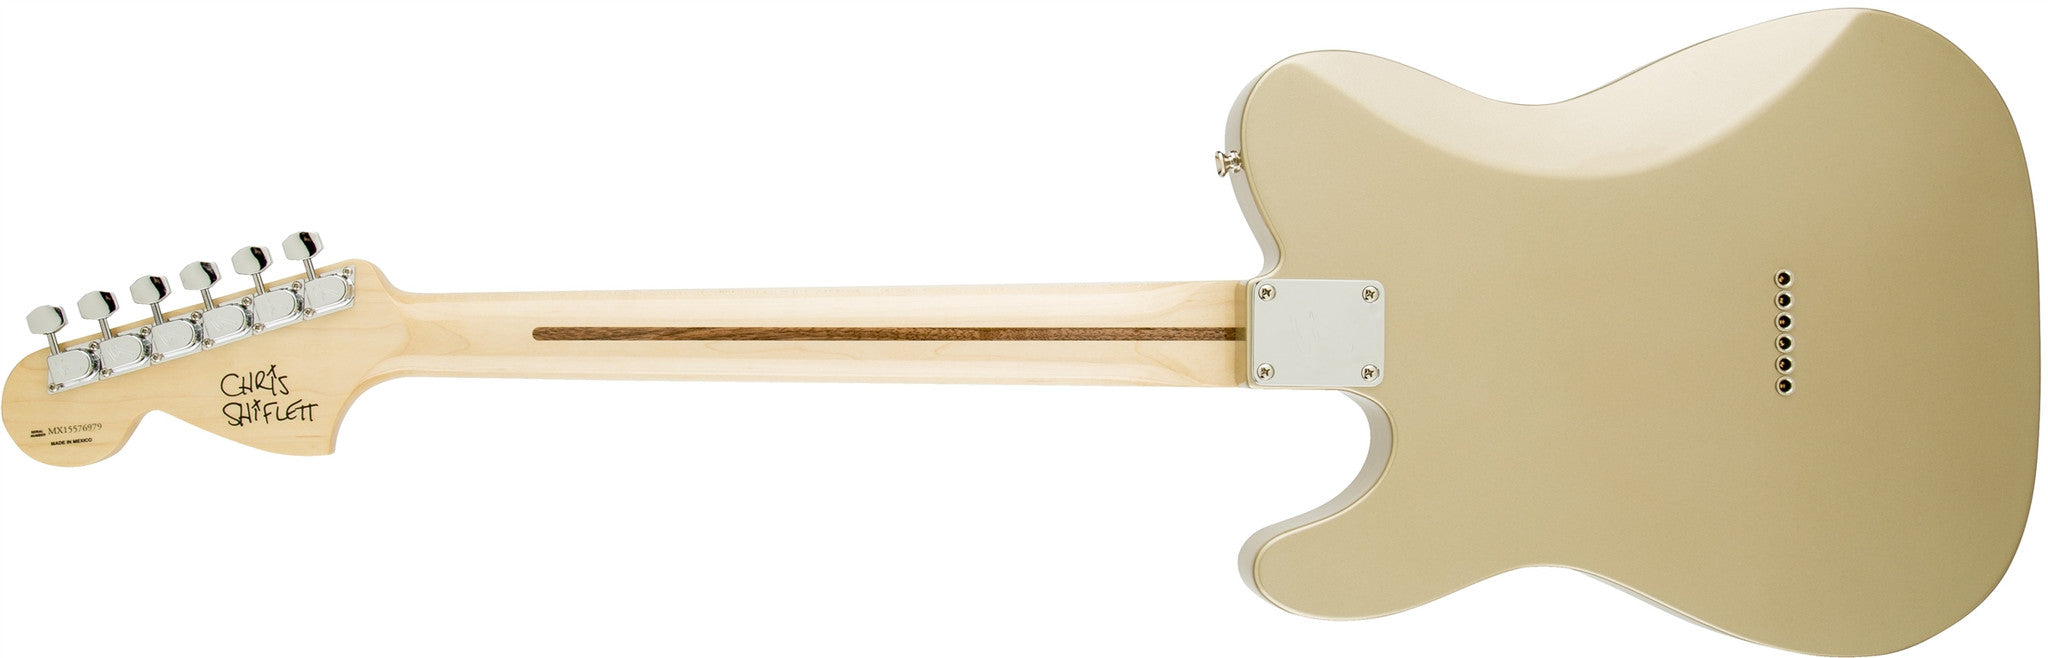 Fender Chris Shiflett Telecaster® Deluxe, Rosewood Fingerboard, Shoreline Gold 0142400744 - L.A. Music - Canada's Favourite Music Store!